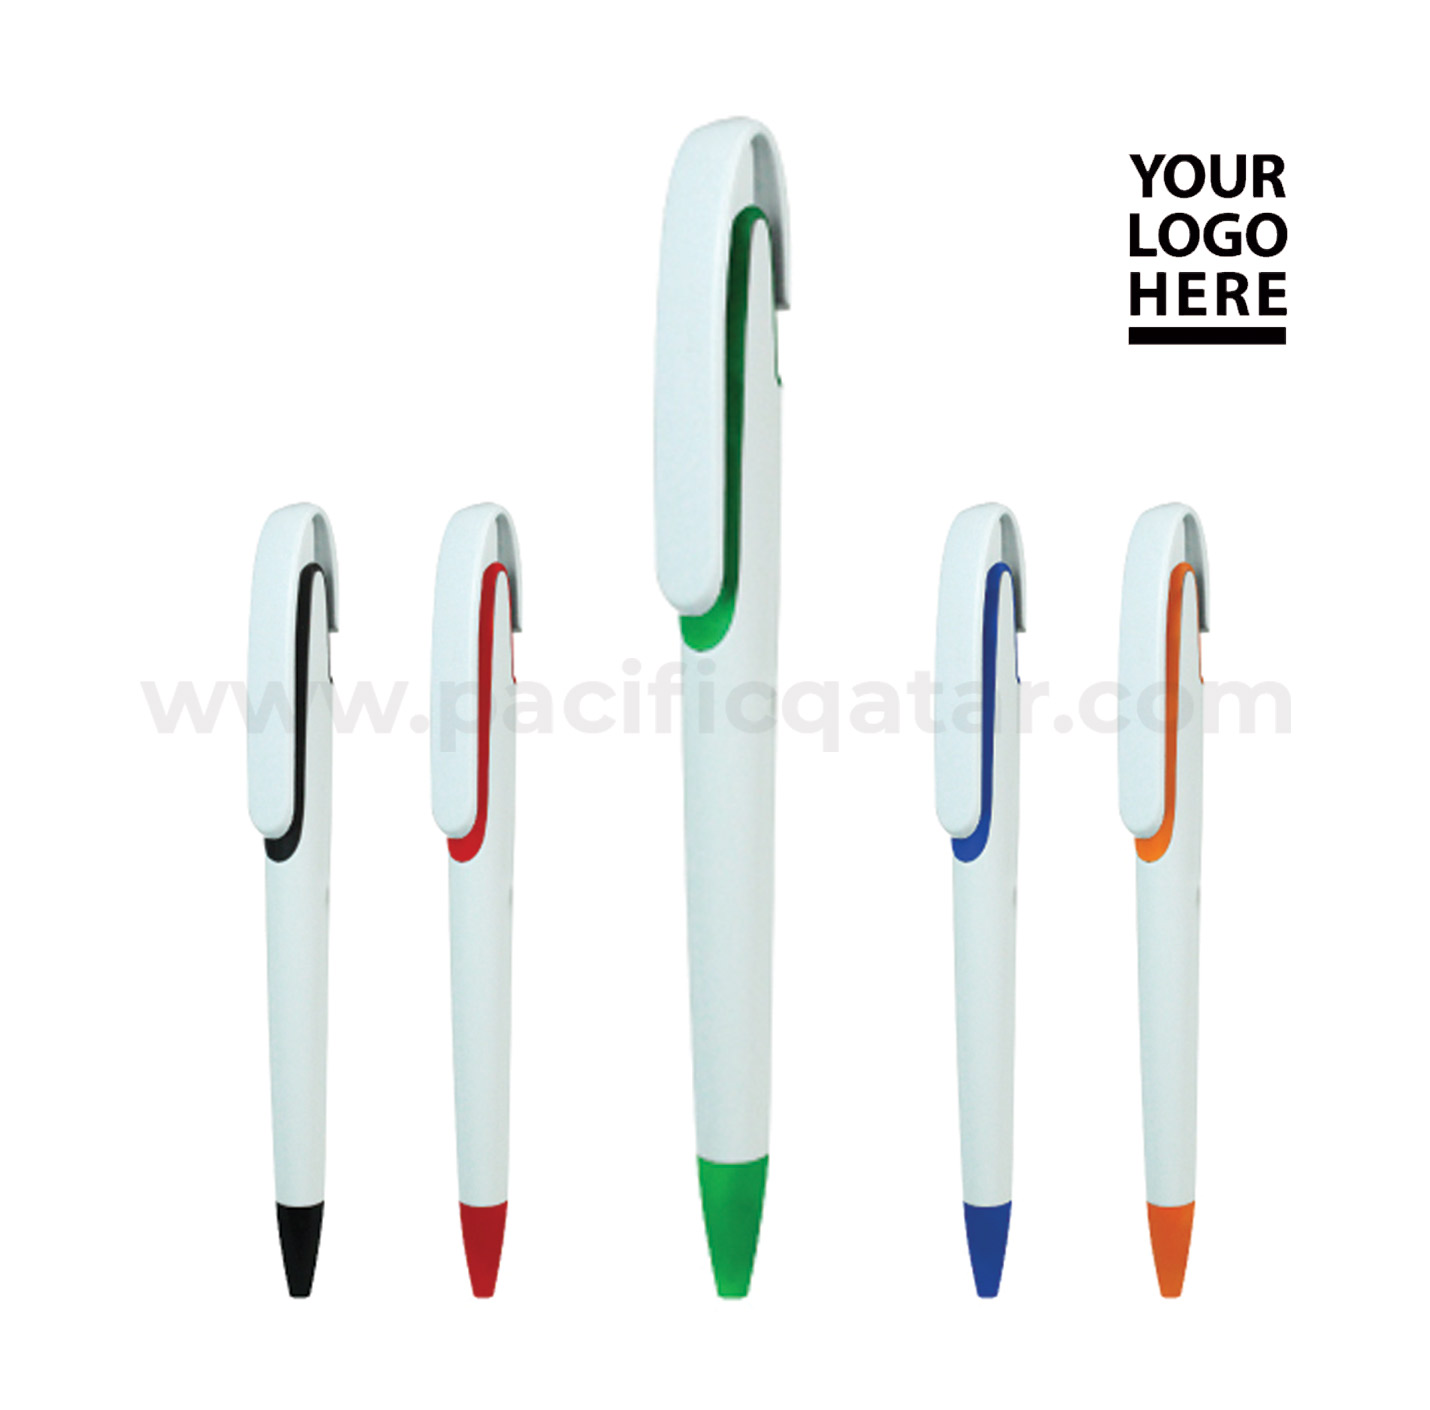 Plastic pen with different color